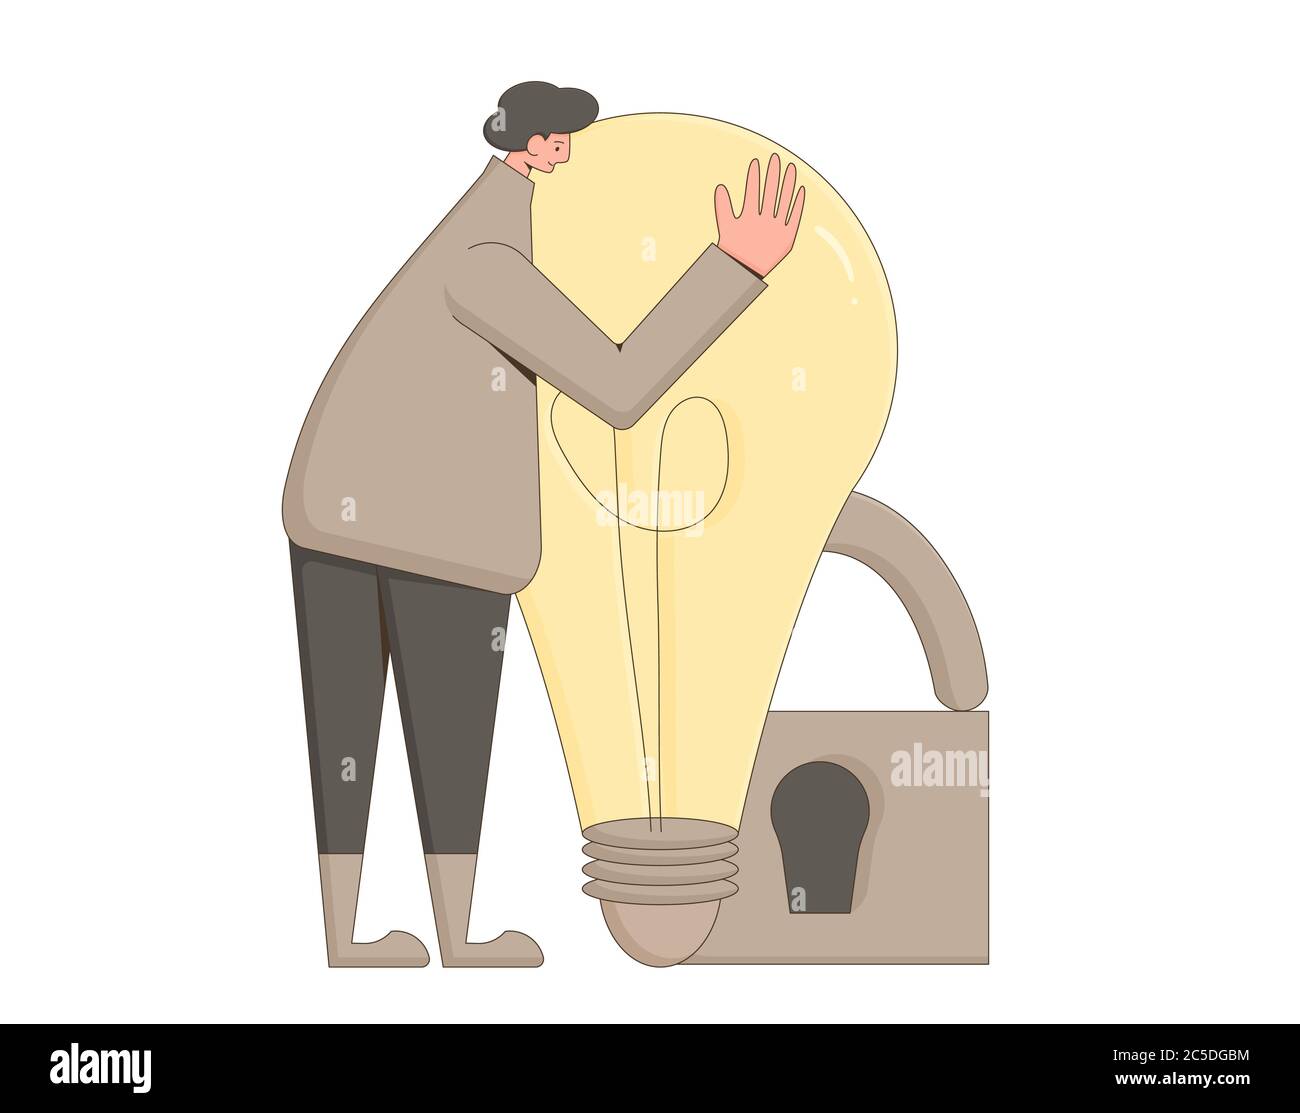 Intellectual property rights. Creator protecting his project. Vector character hugging with creative new idea symbol isolated on white background. Stock Vector